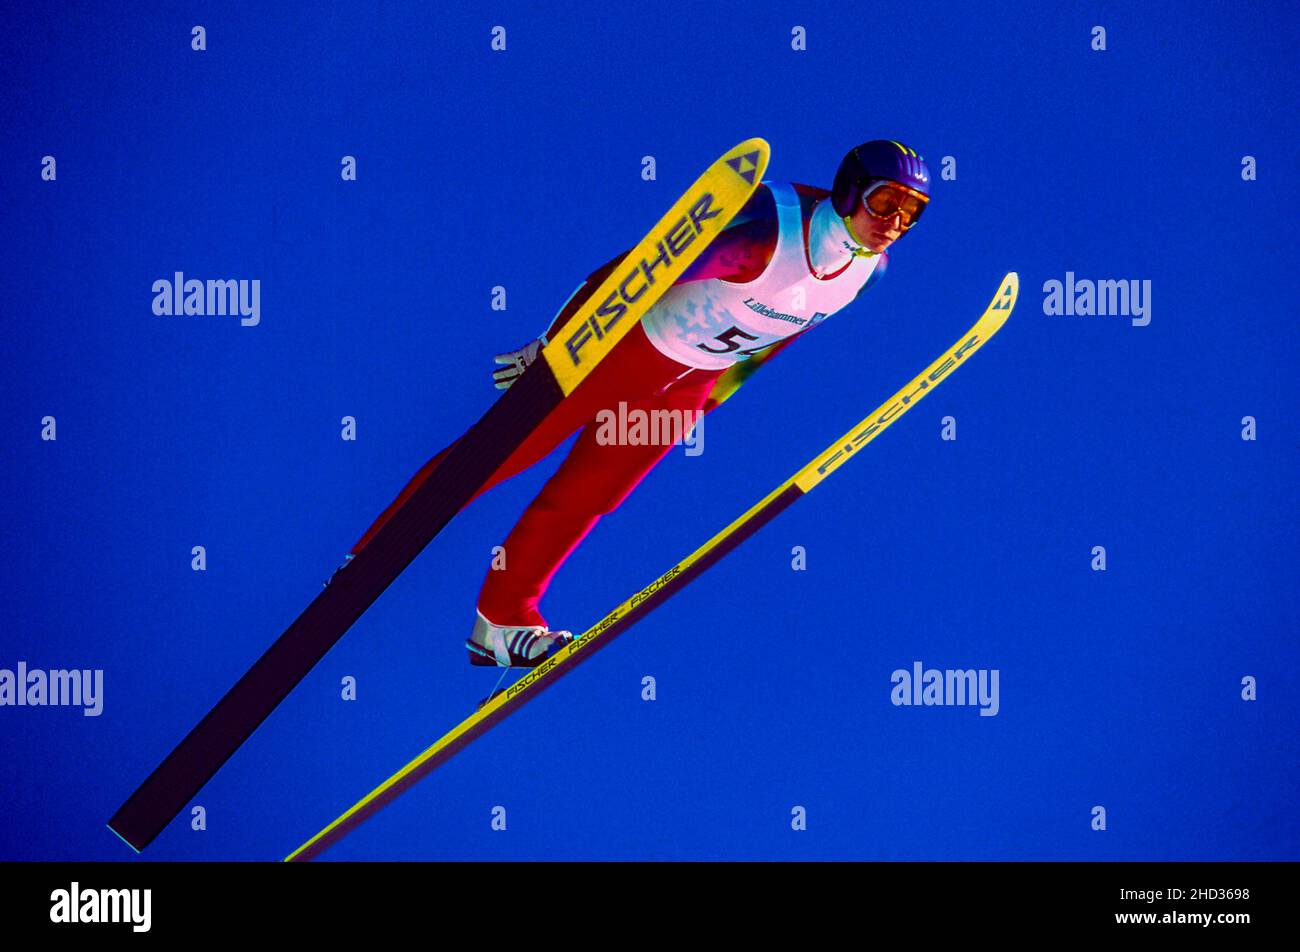 Mikhail Yesin (RUS) competing in the Men's K120 individual ski jumping at the 1994 Olympic Winter Games Stock Photo